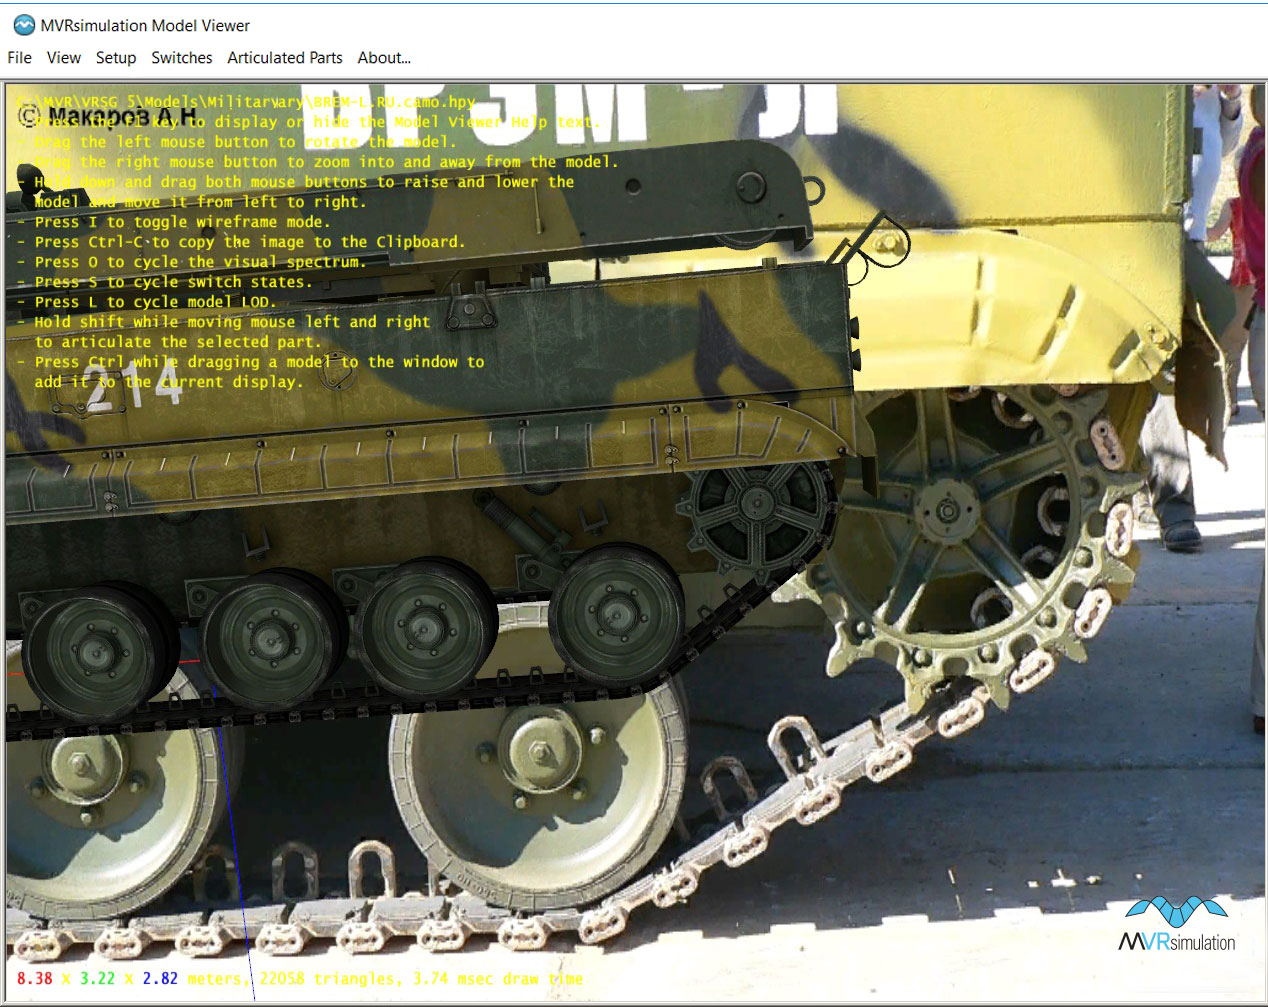 Another view of MetaVR's BREM-L model displayed in the Model Viewer against a different publicly available photograph of the actual vehicle used as a background reference image. (Photo credit: Makarov Aleksey at Prime Portal.)